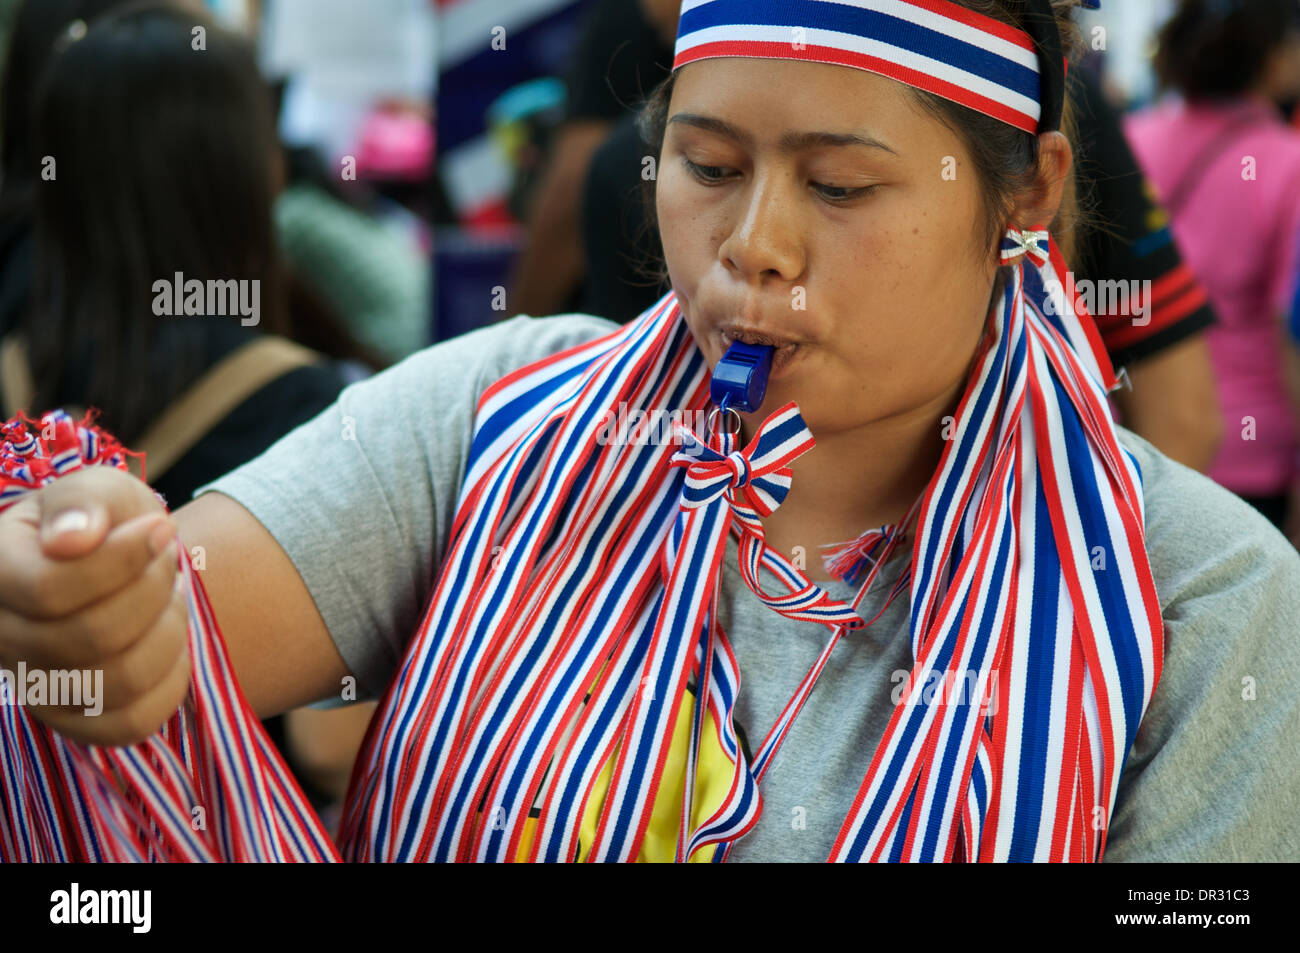 Bangkok, Thailand. Jan. 18th, 2014. Thai anti-government protester blowing her whistle. blowing whistles has become a trademark of the current protests. After a deadly bomb attack on Friday in Bangkok, Tens of thousands of protesters took to the streets to demand the resignation of Thai Prime Minister Yingluck Shinawatra. 'Shutdown Bangkok' is organized by the People's Democratic Reform Committee (PDRC). Credit:  Kraig Lieb / Alamy Live News Stock Photo